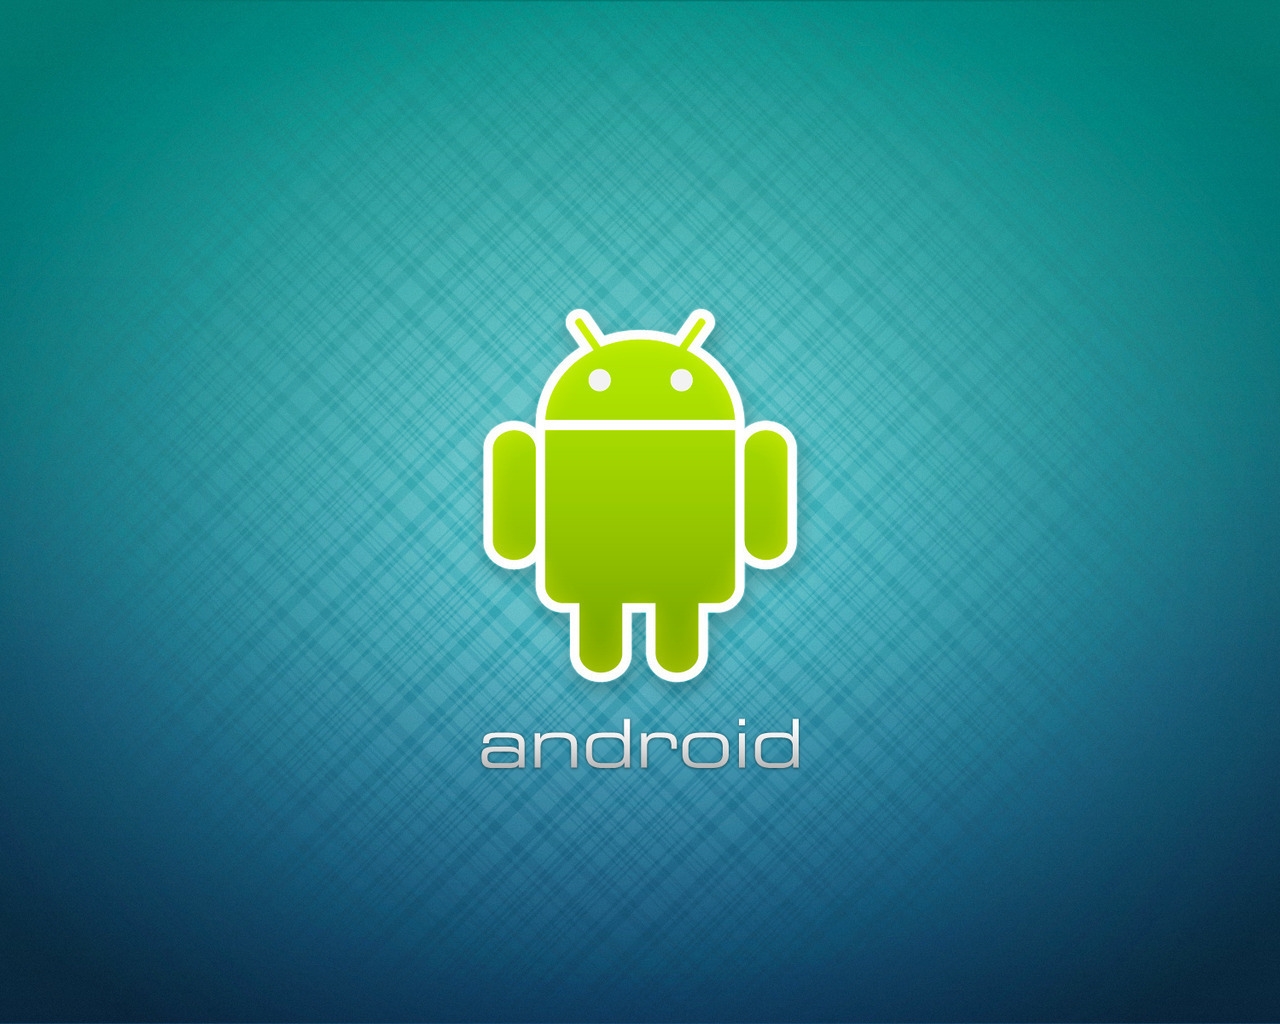 Just Android Logo for 1280 x 1024 resolution